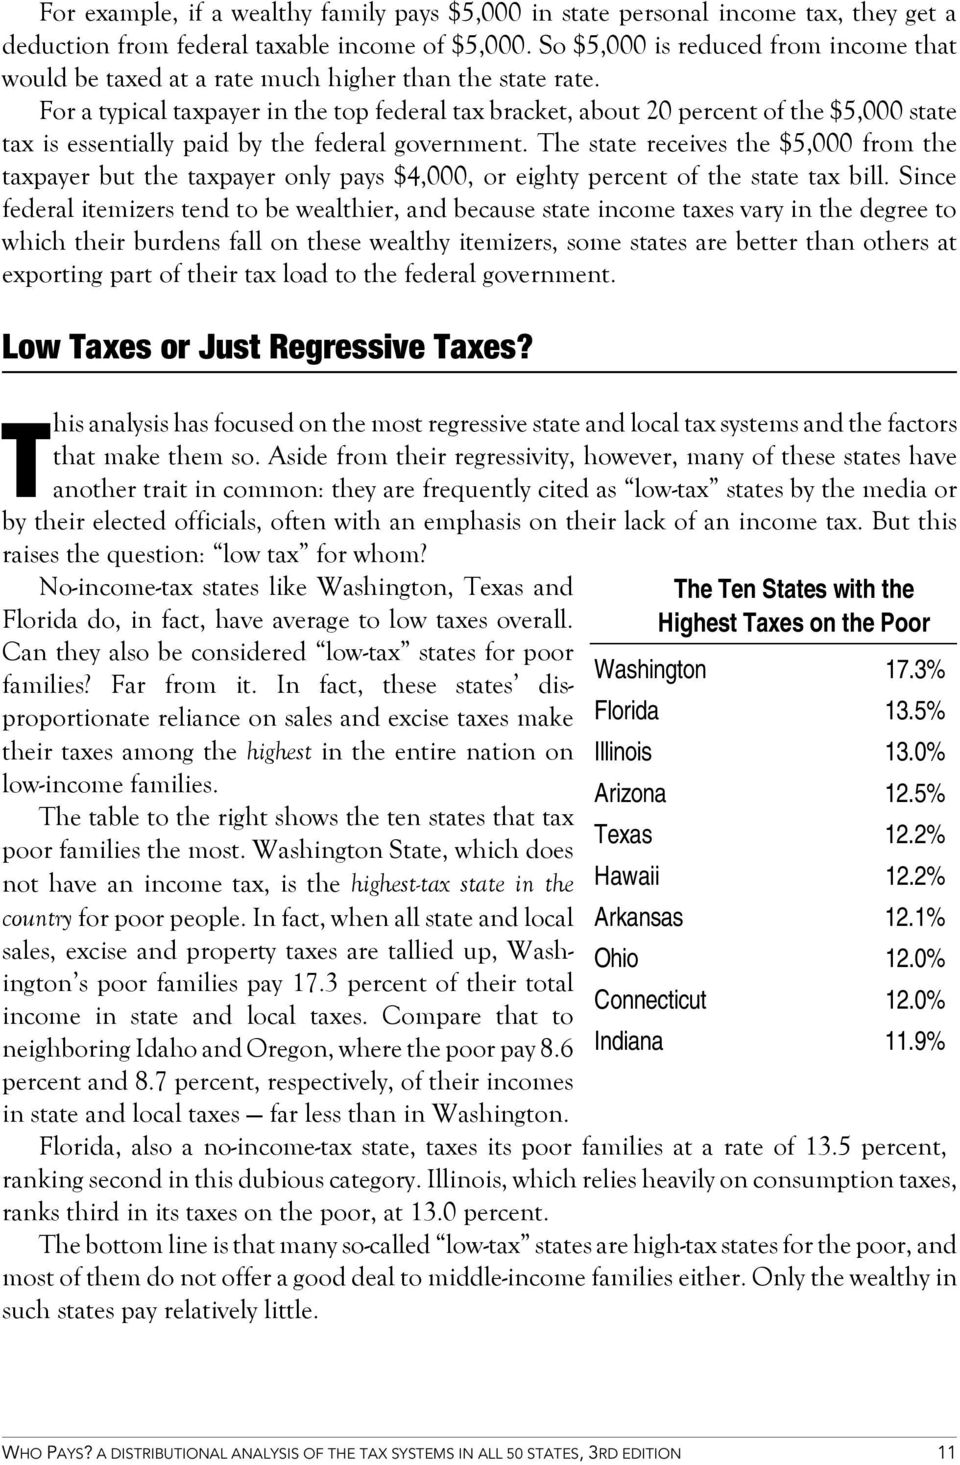 For a typical taxpayer in the top federal tax bracket, about 20 percent of the $5,000 state tax is essentially paid by the federal government.